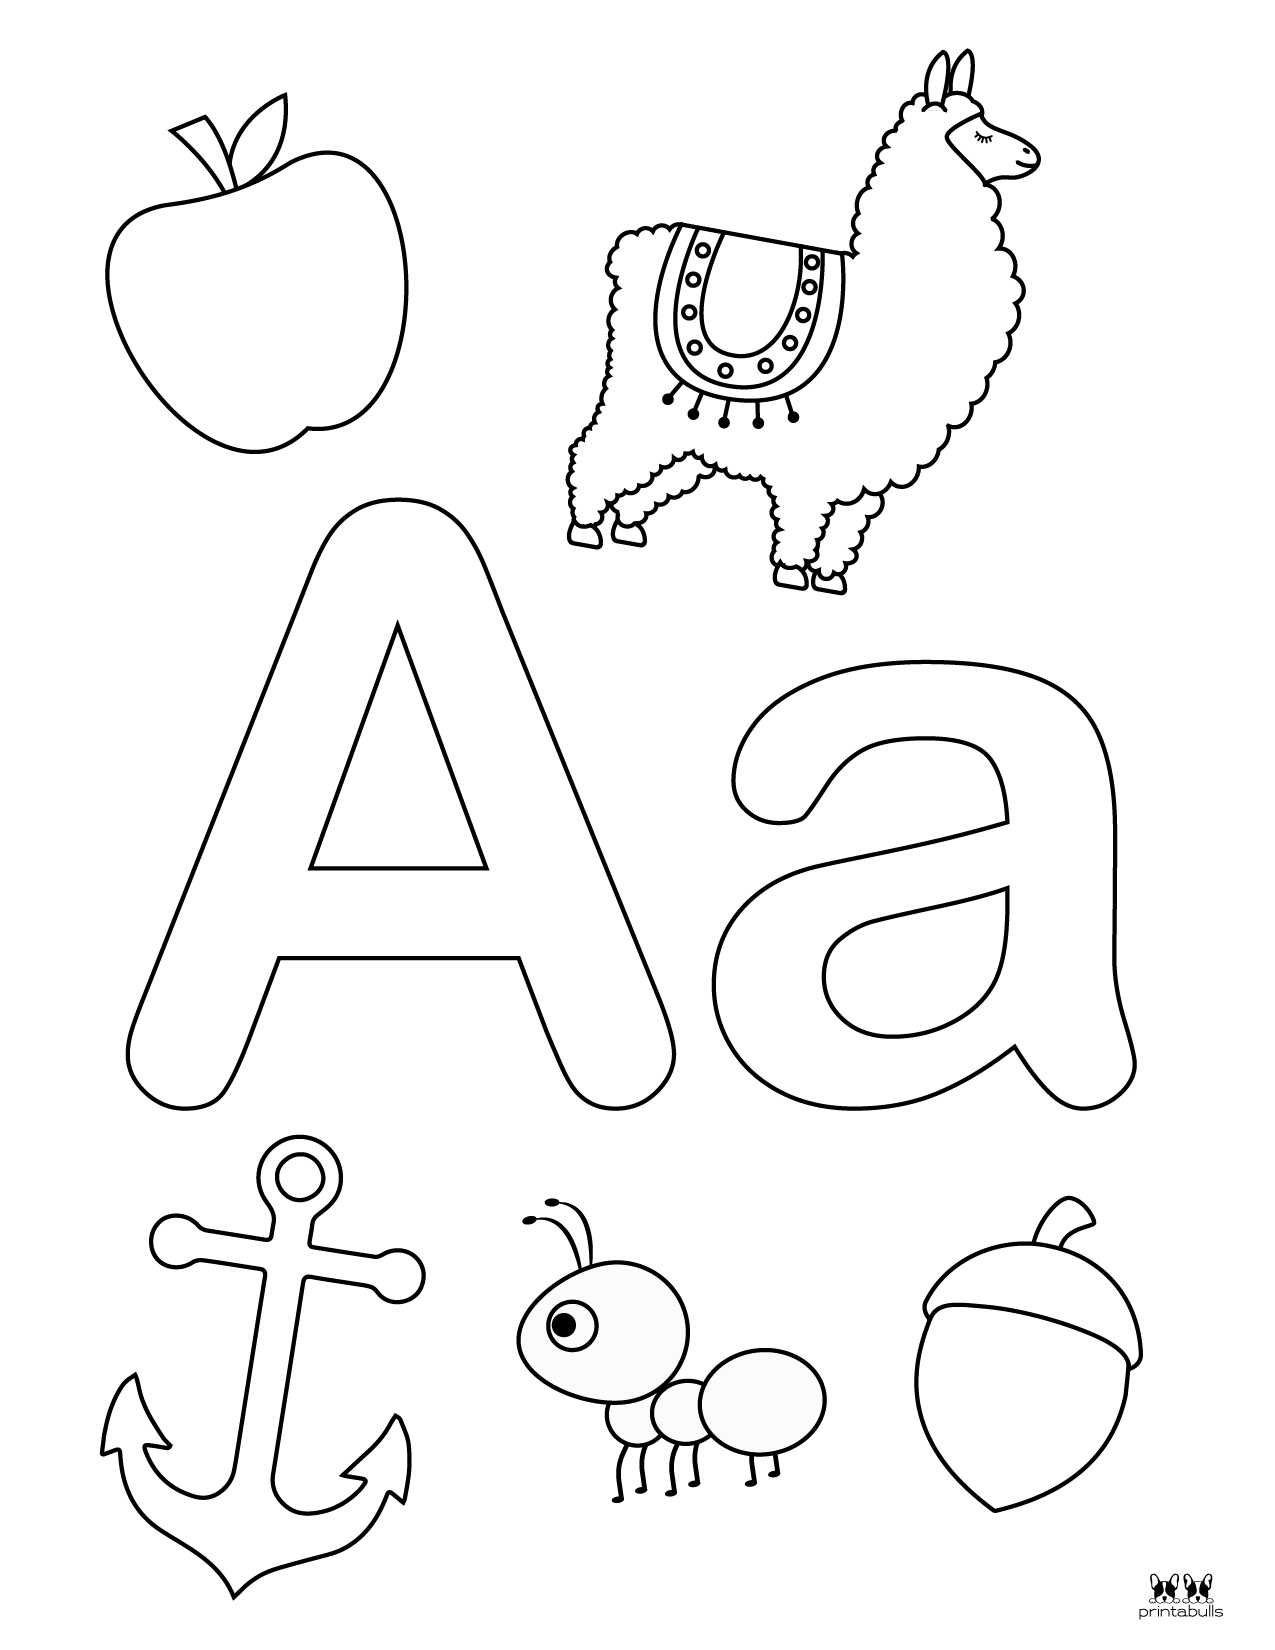 17-kid-friendly-letter-a-worksheets-kittybabylovecom-the-letter-a